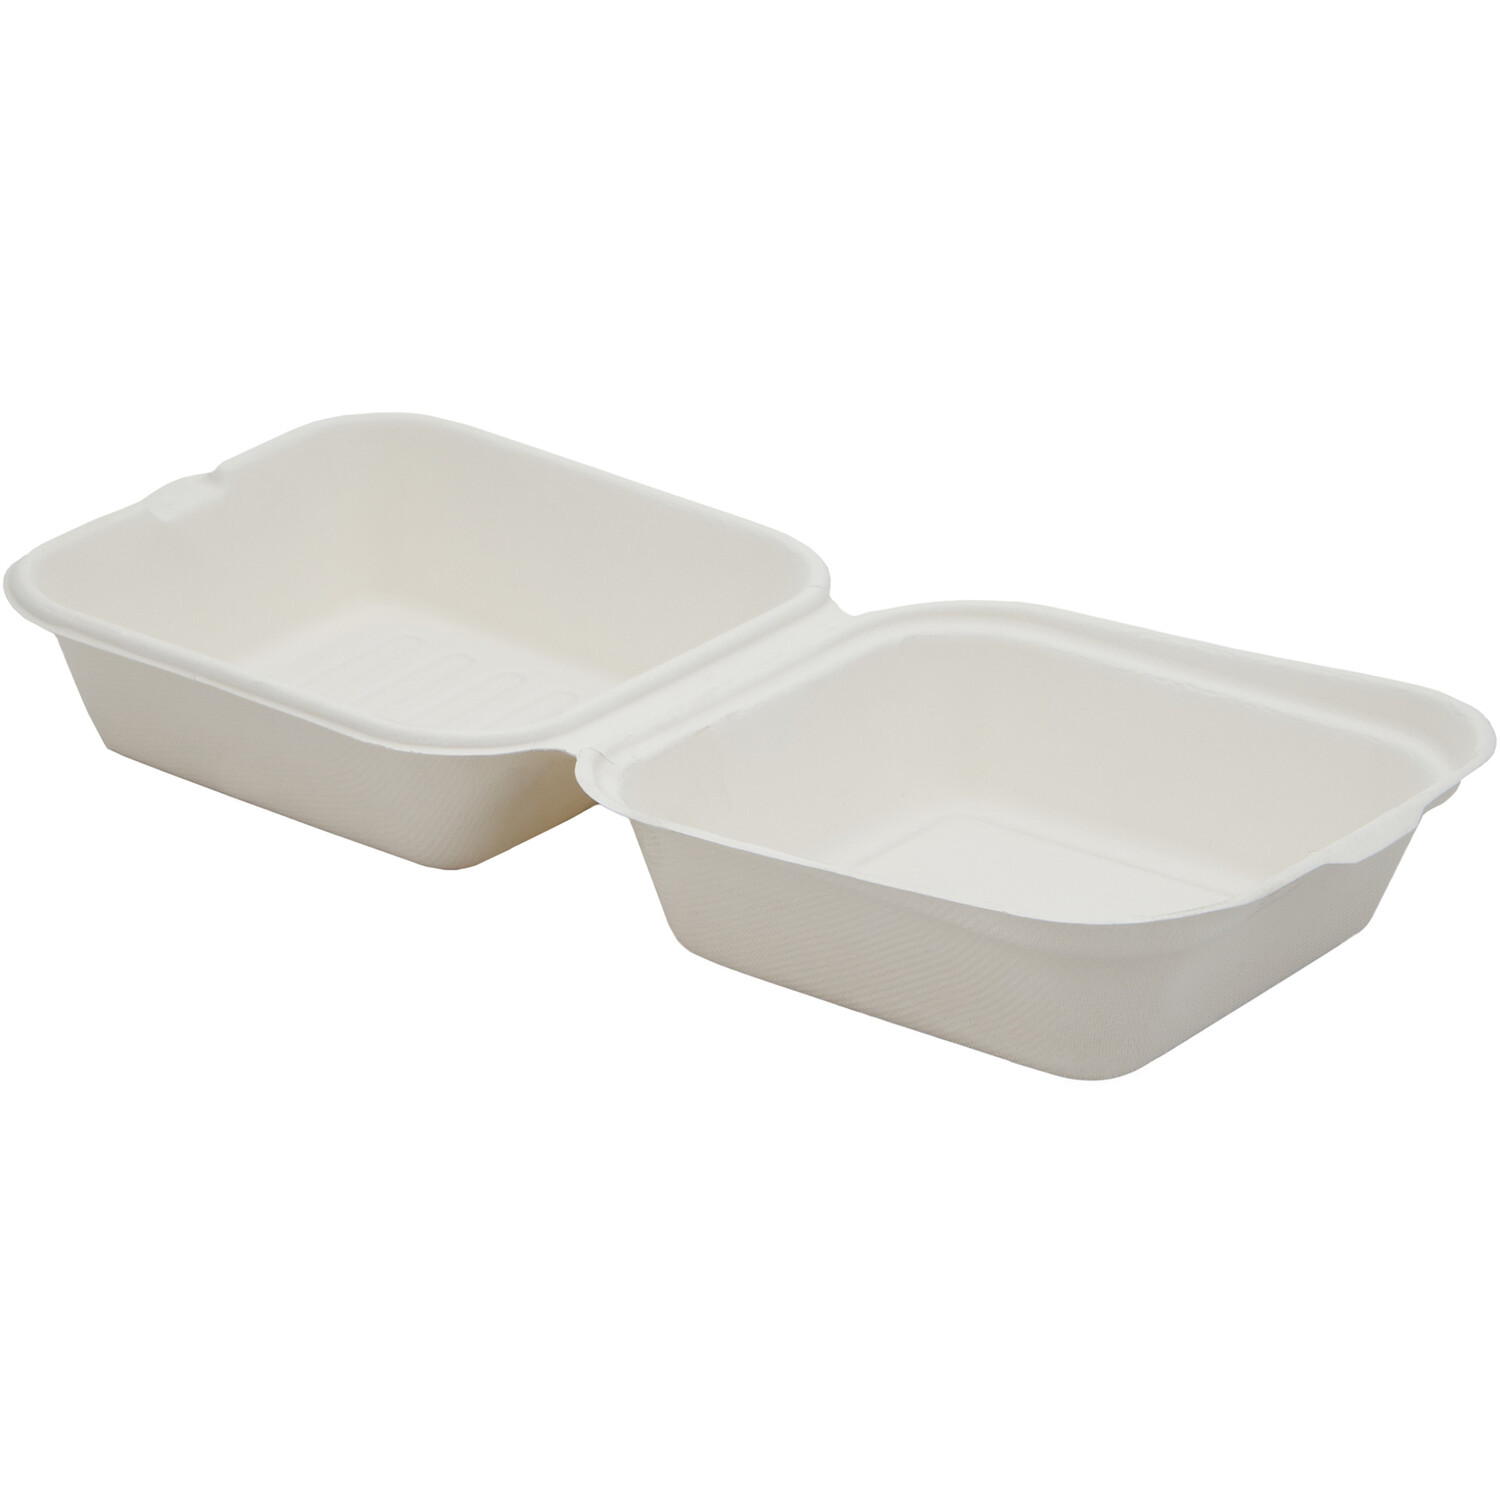 Pack of 10 Bagasse Burger Boxes - White Image 4